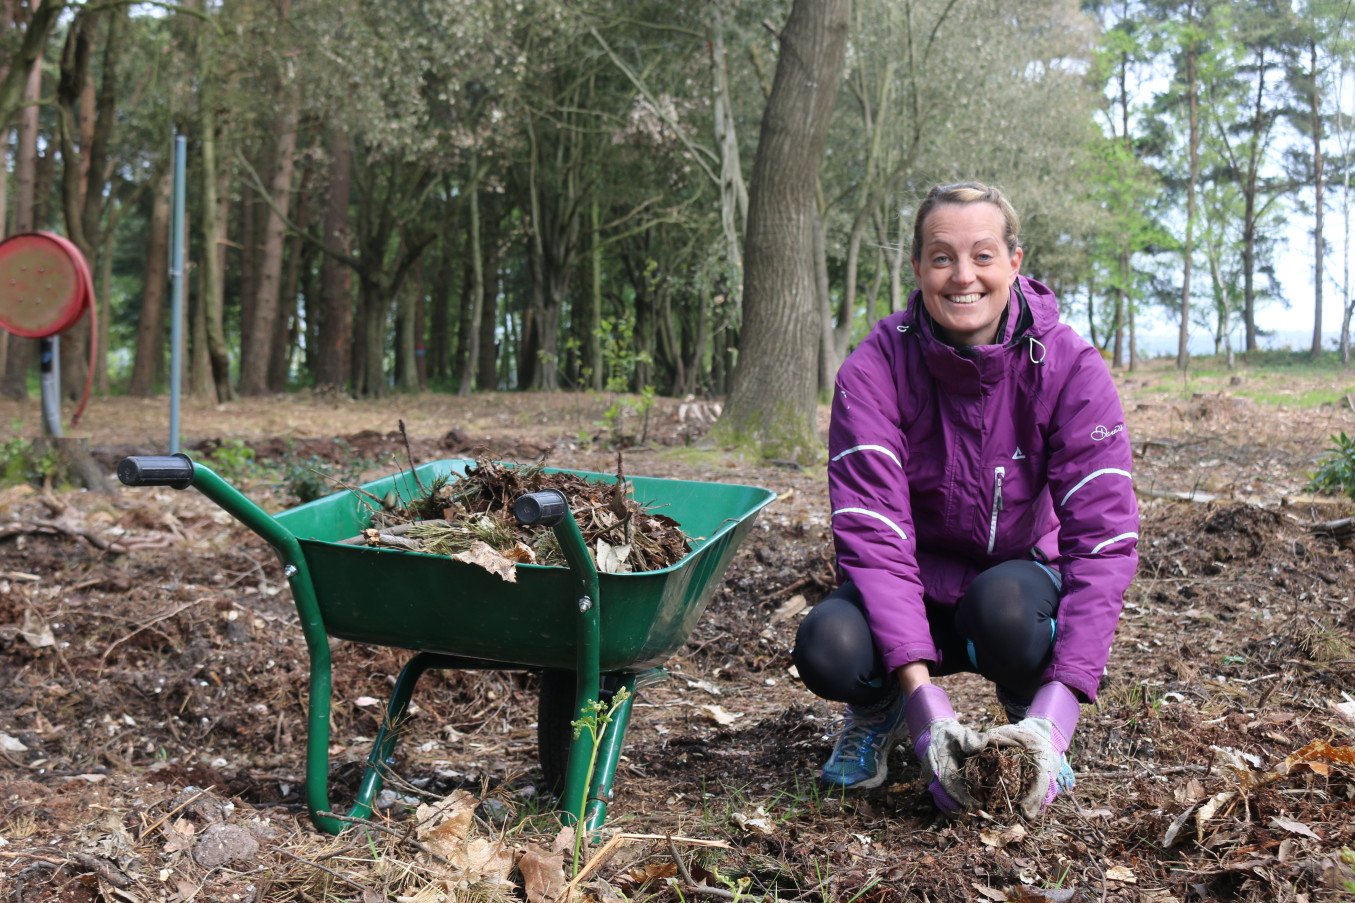 A woman looks at the camera as she places compost on the ground from a wheel barrel